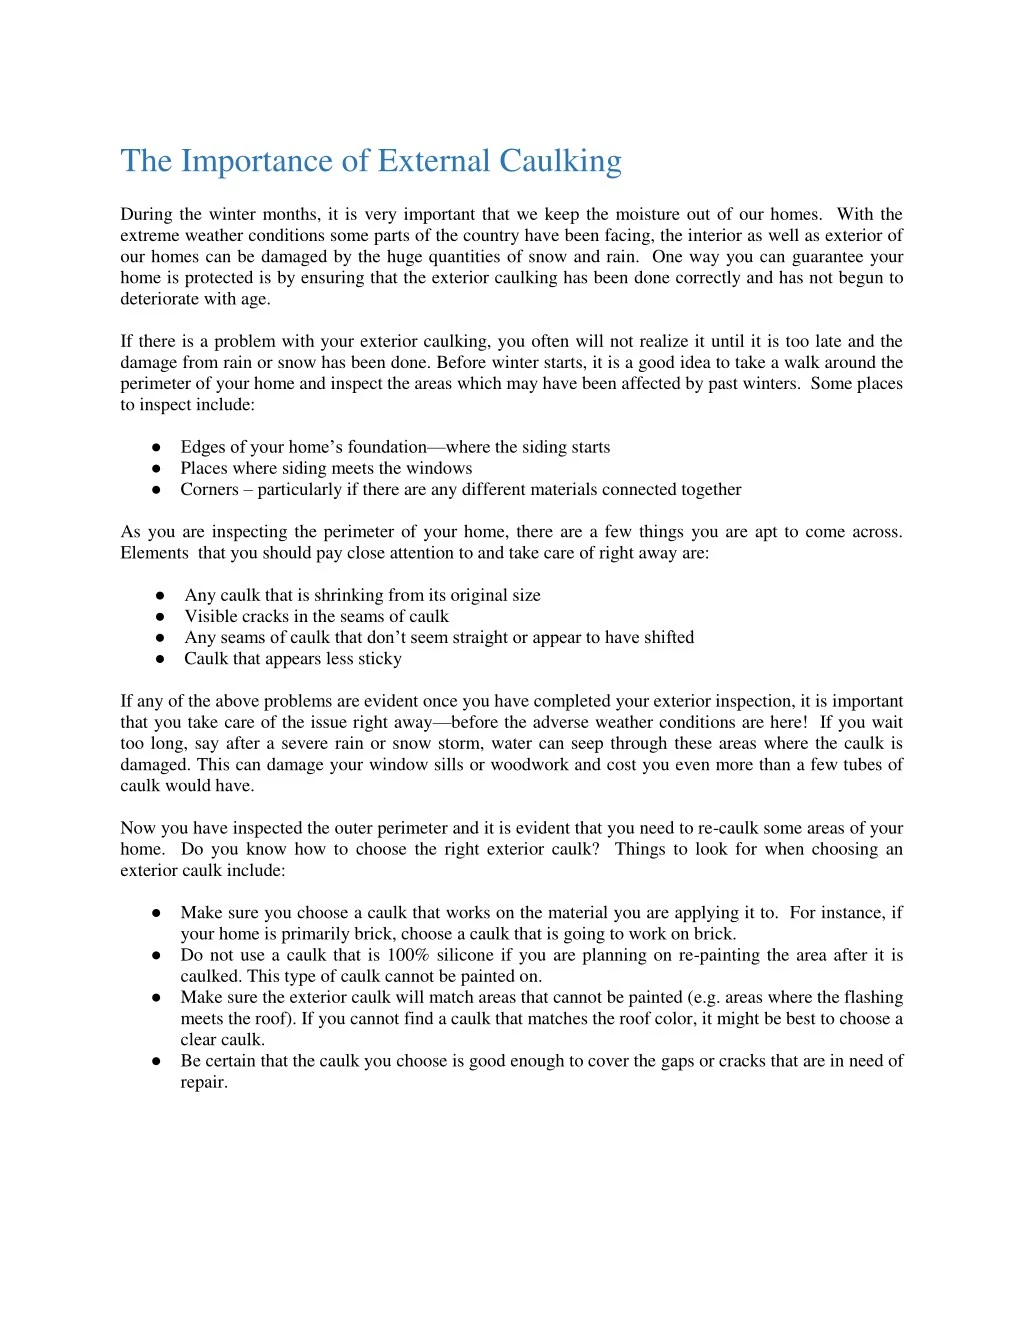 the importance of external caulking during